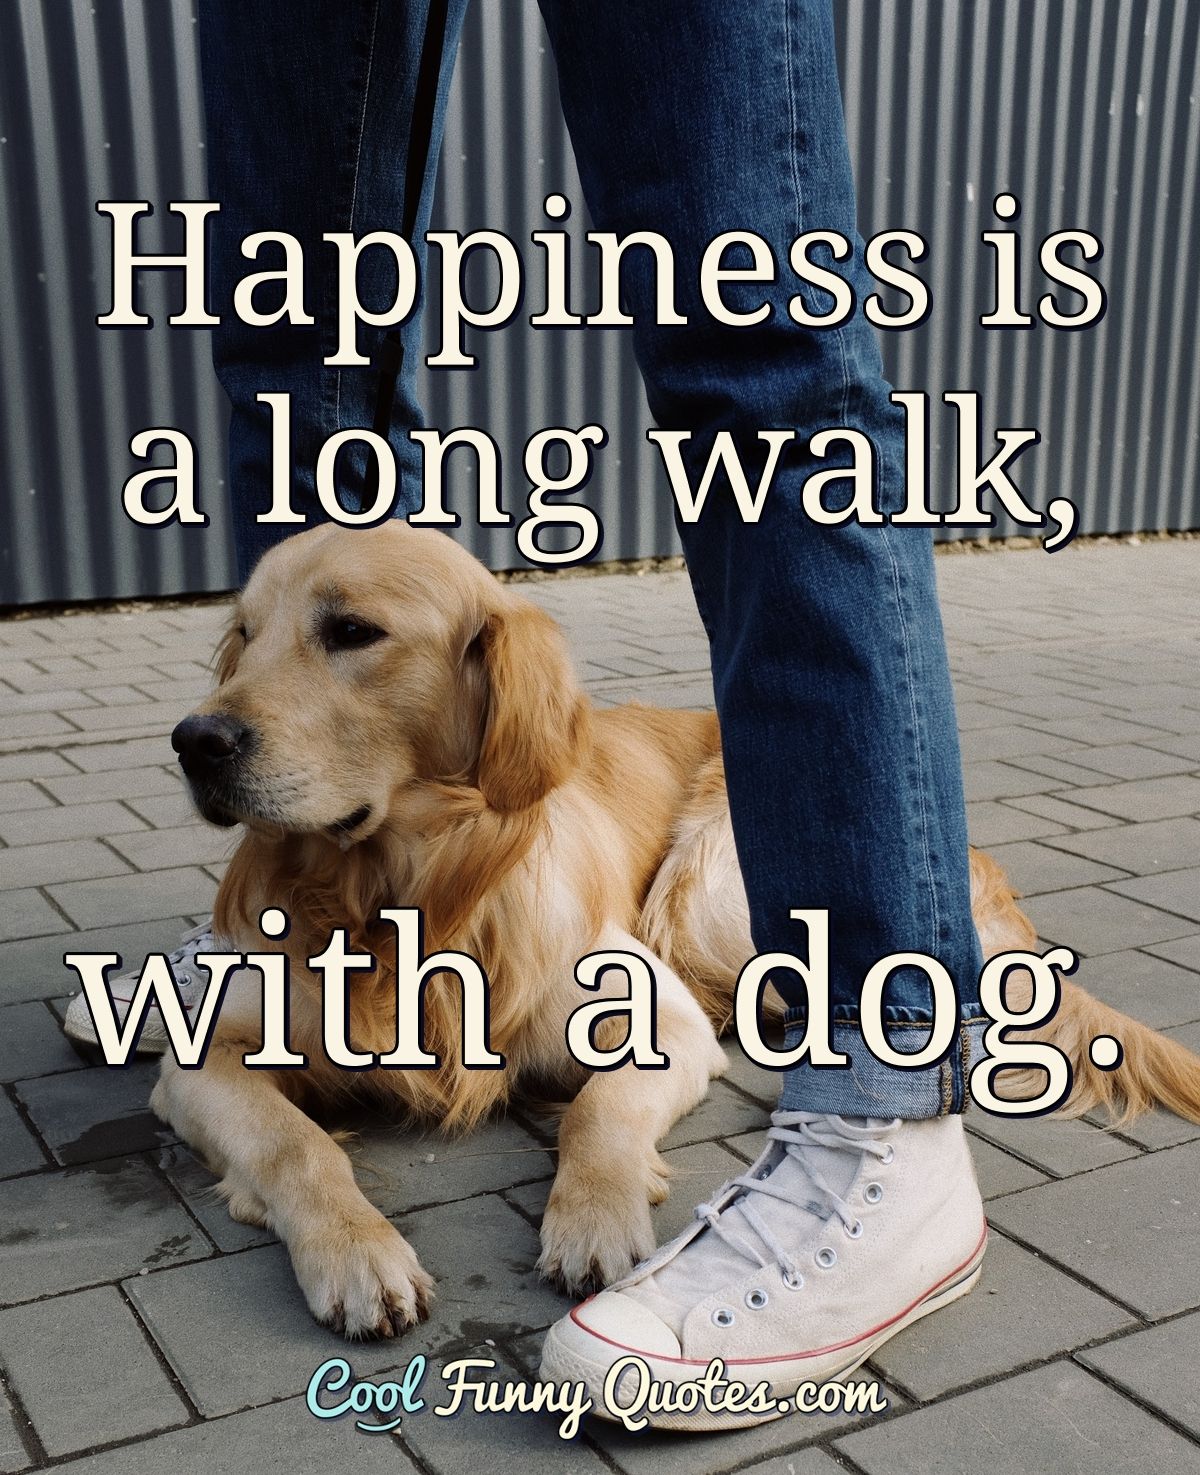 Happiness is a long walk, with a dog.